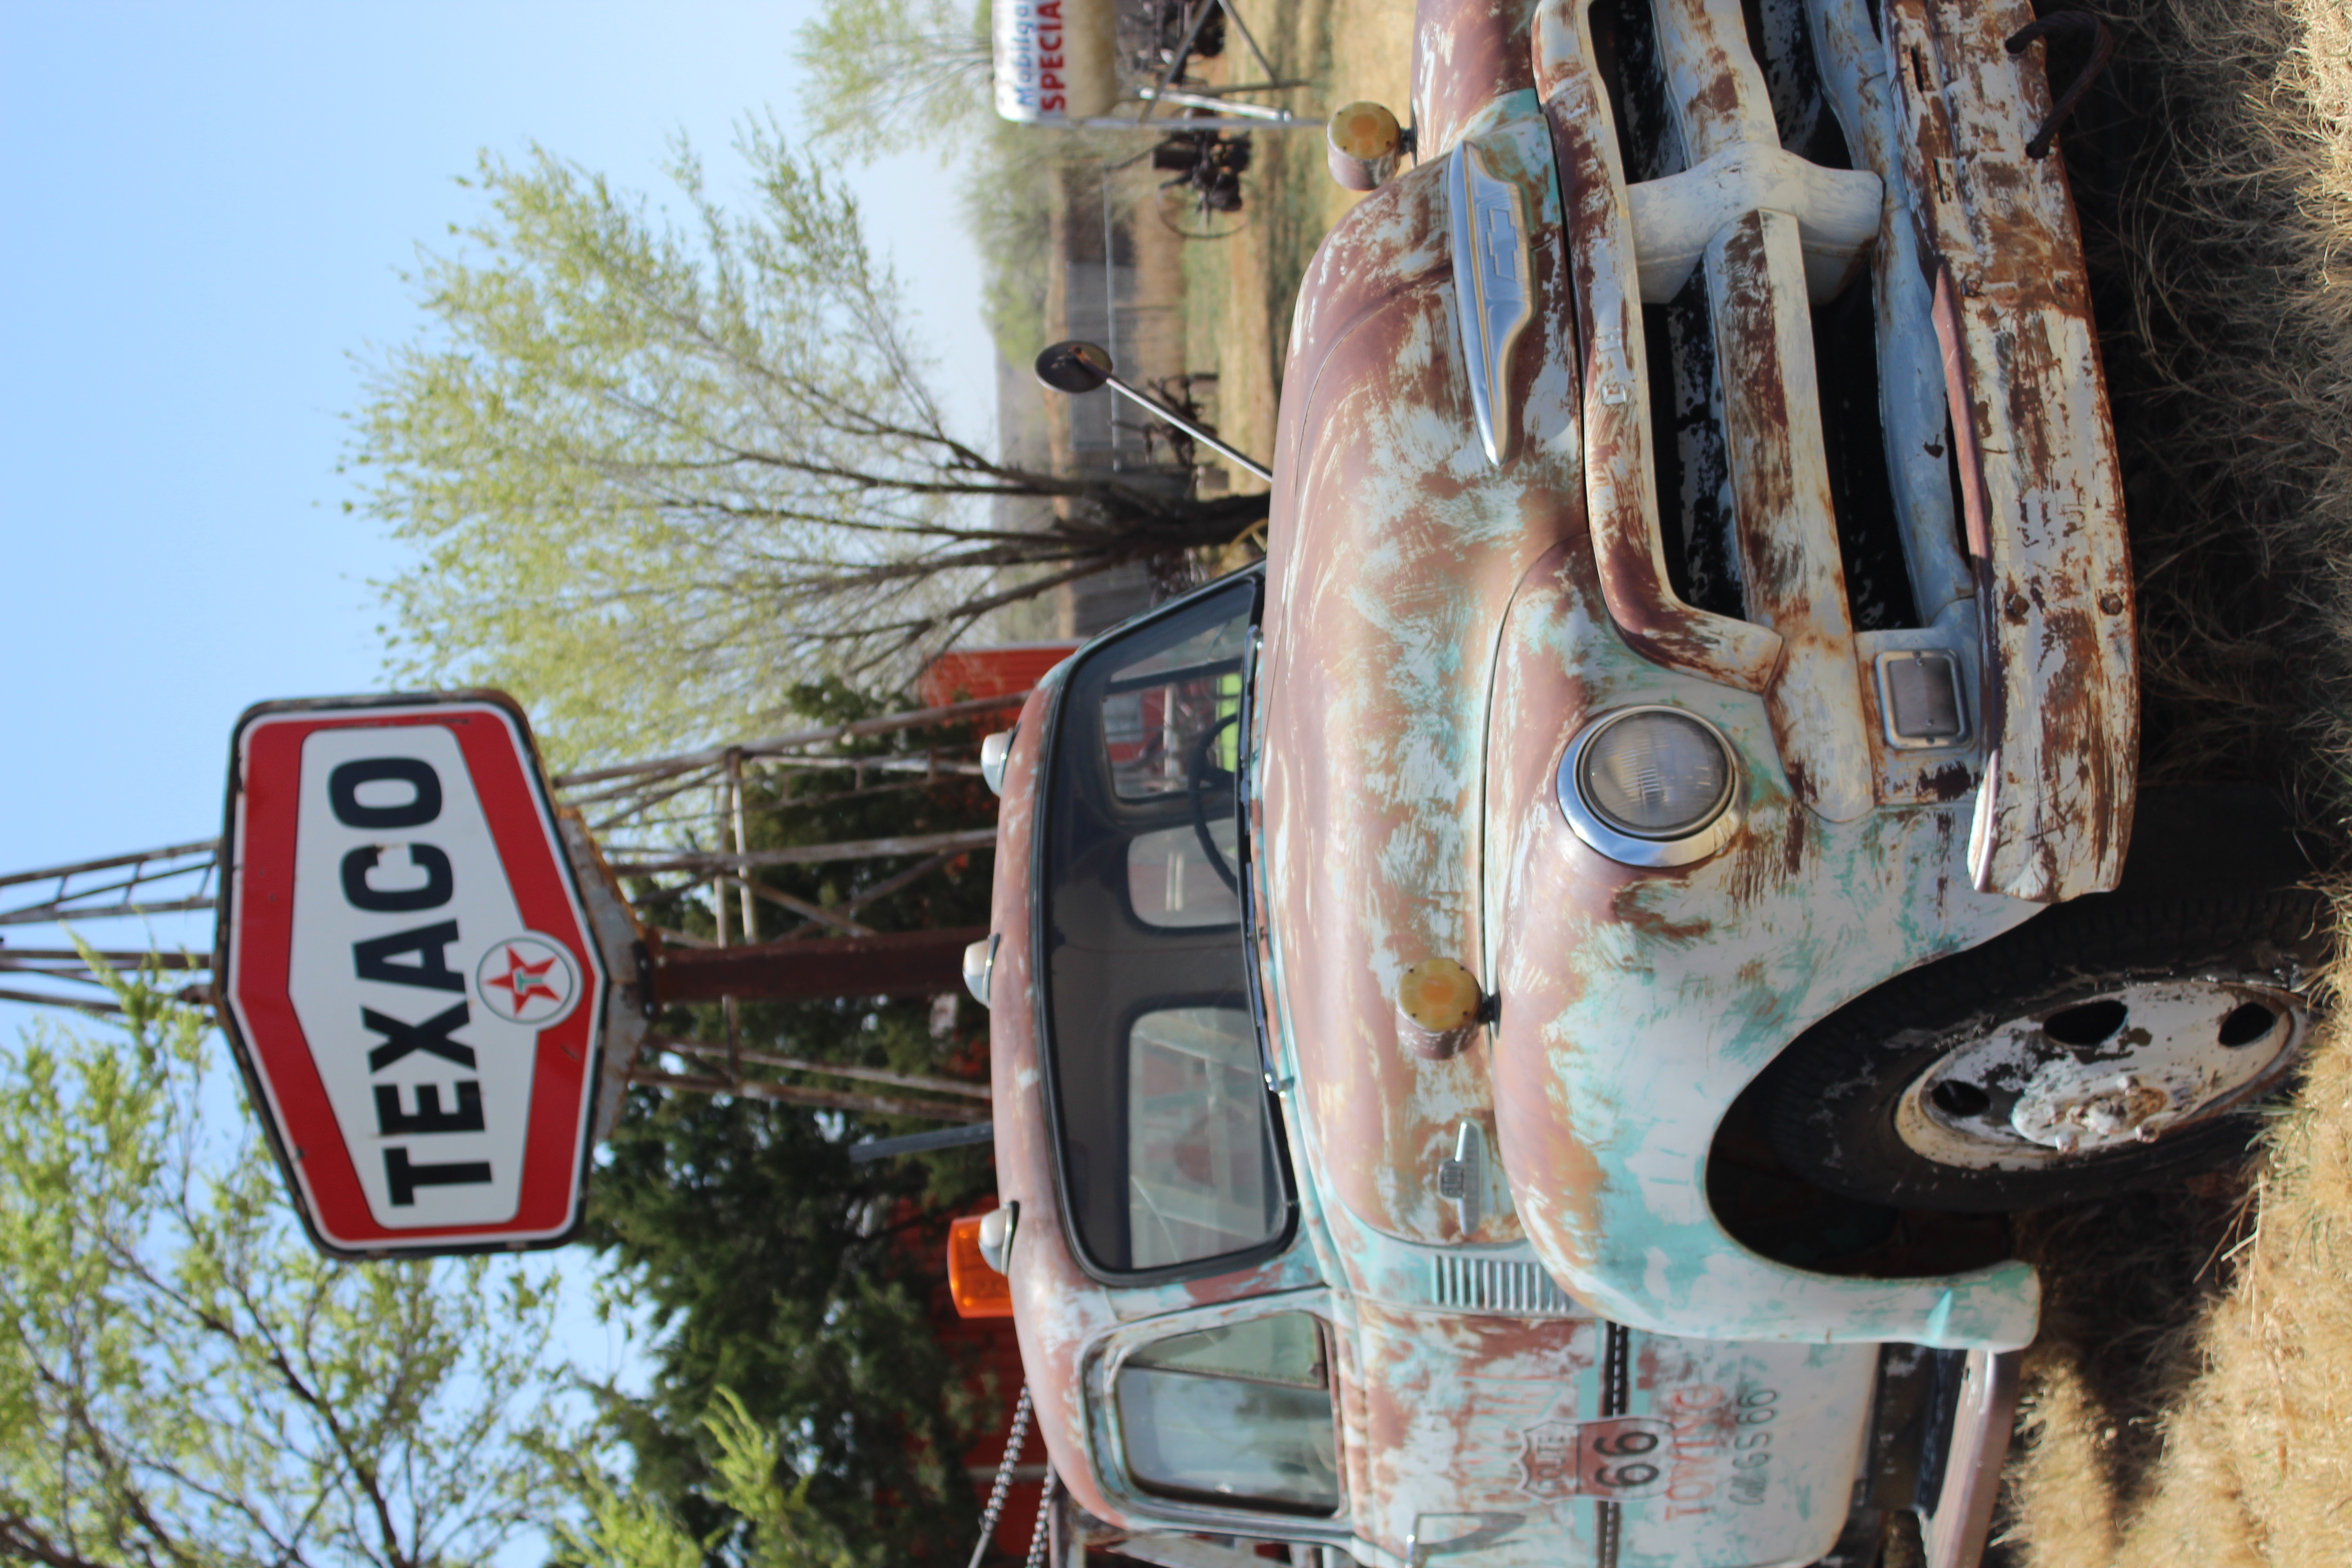 Route 66 Truck